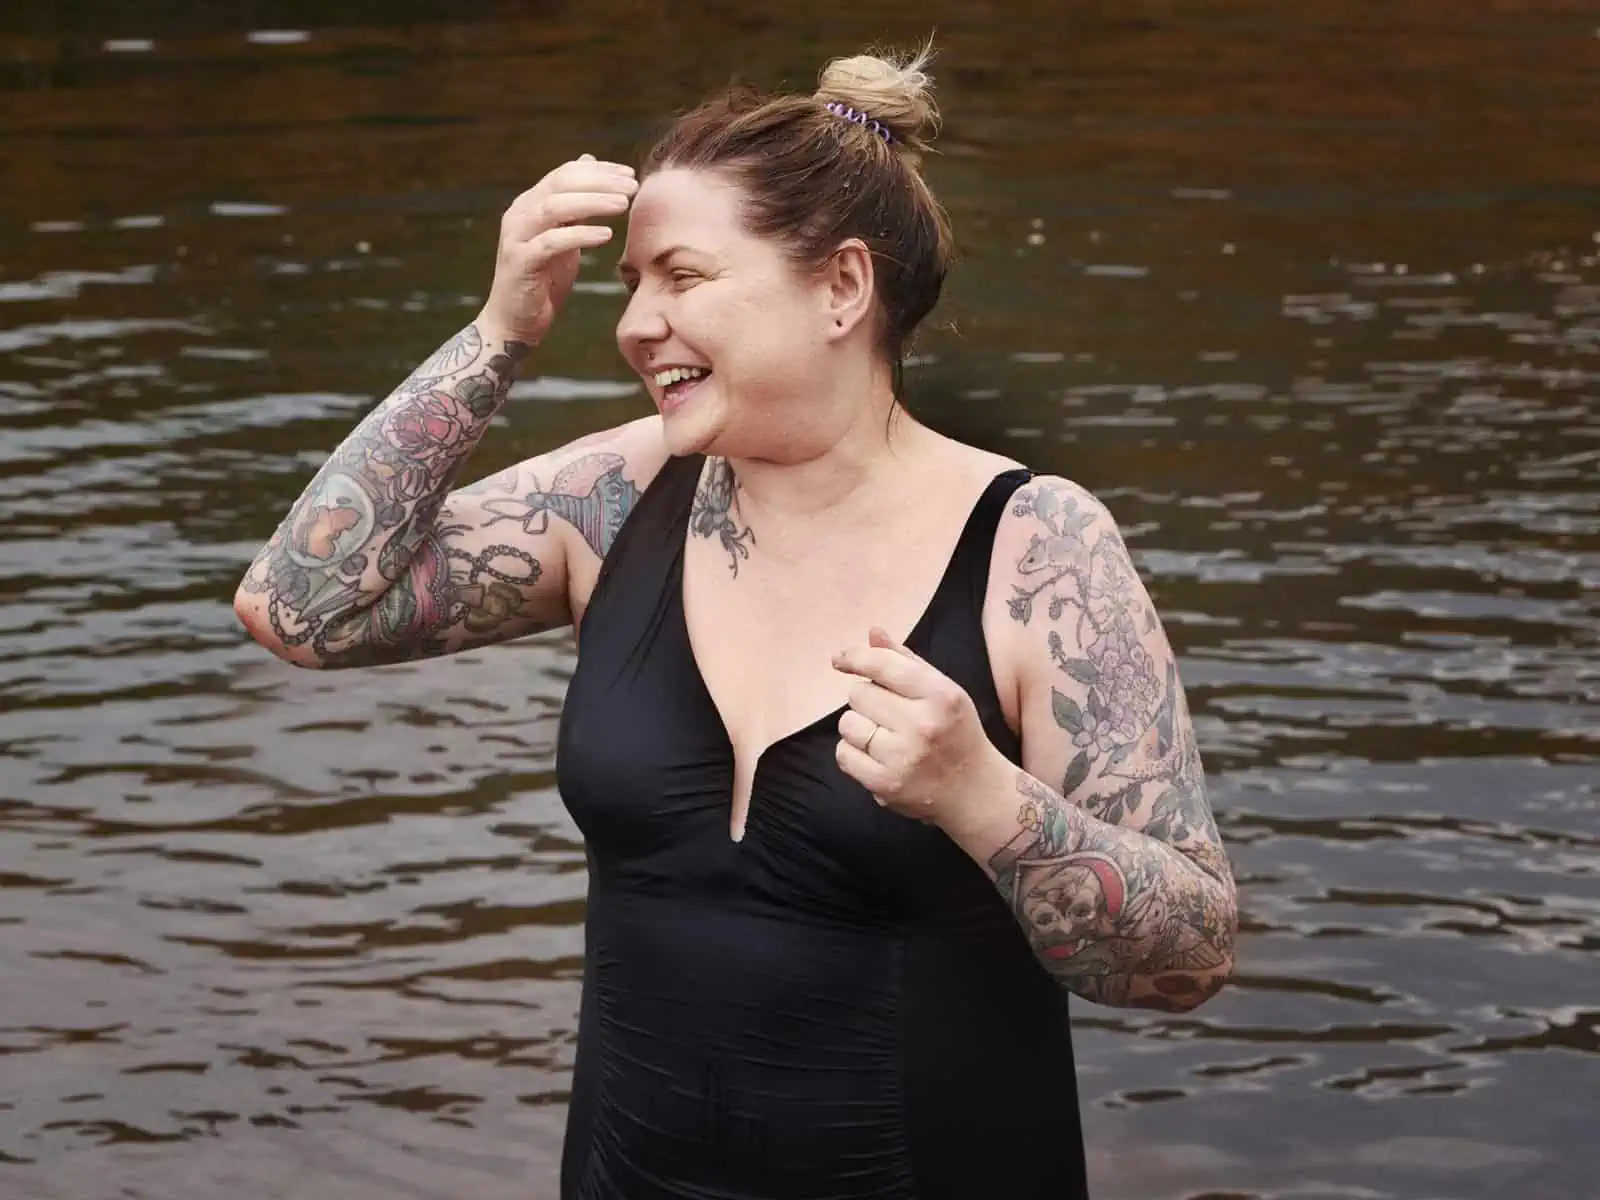 ID: A landscape image. Fay is captured from head to low torso standing in the water. Fay wears a black swimsuit and is laughing. Fays right hand is up to the face brushing water off from the swim.